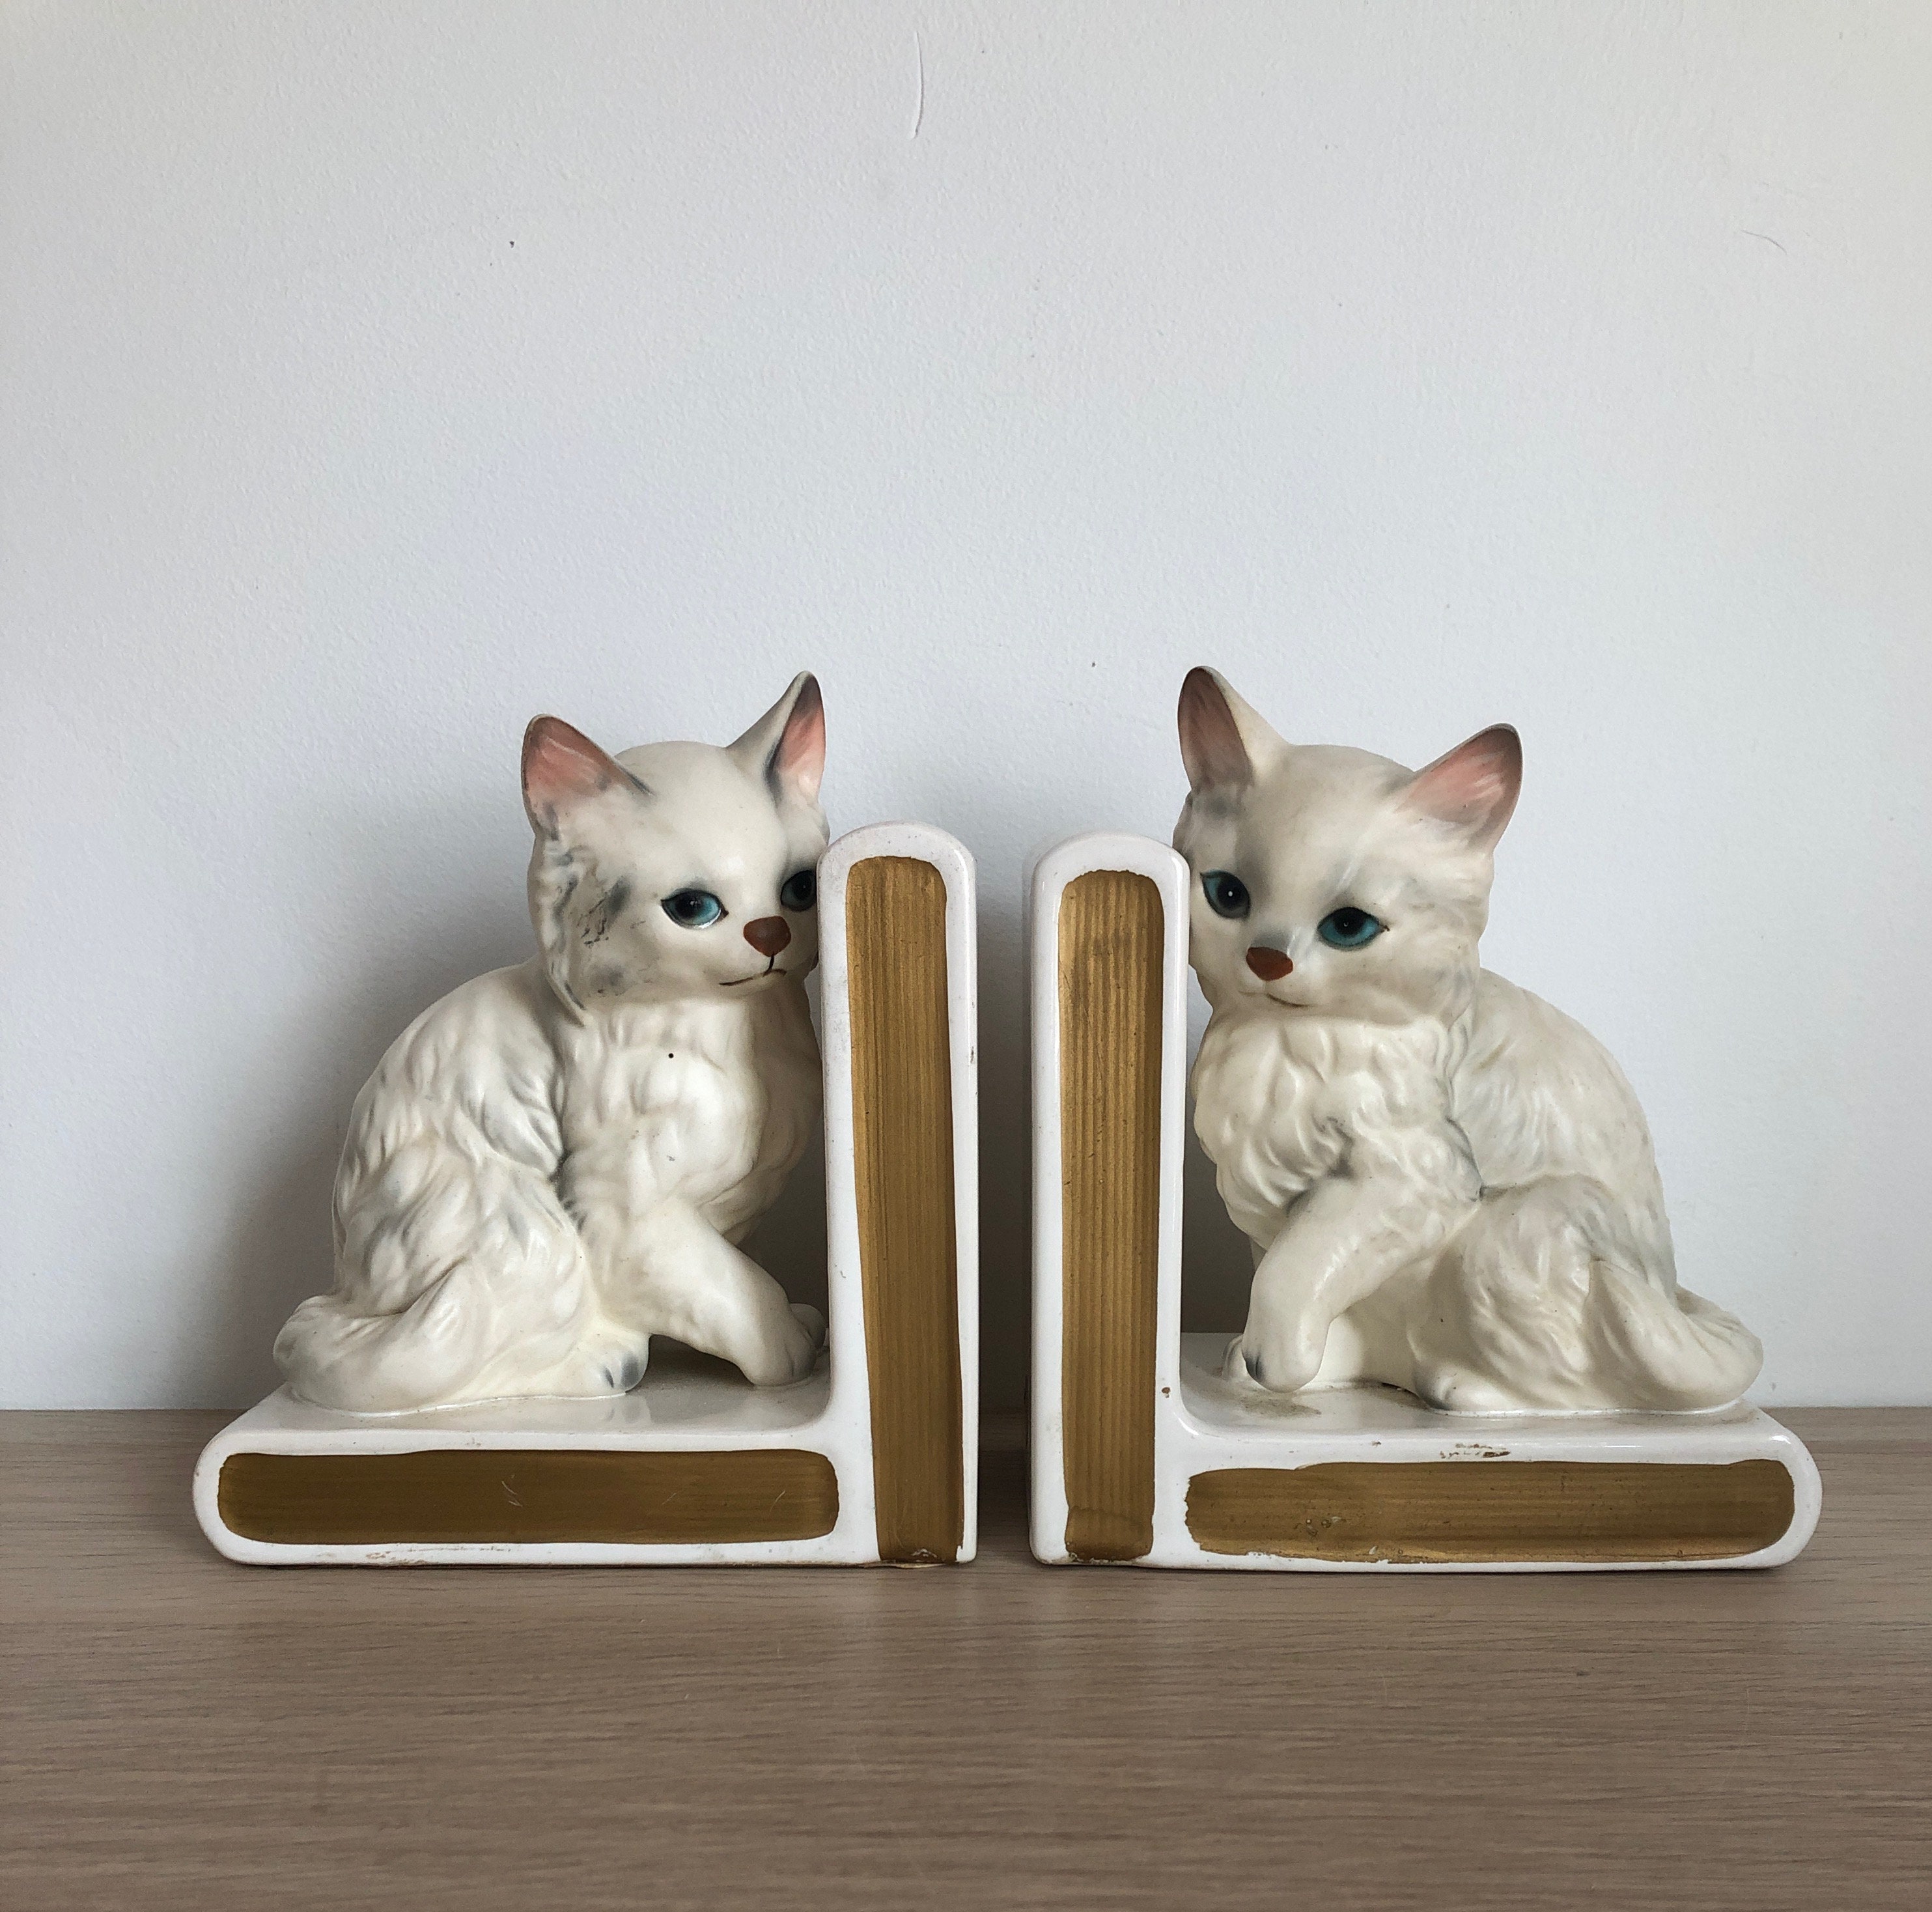 Single White Cat Bookend Vintage Ceramic Kitten Bookend by Lefton in Exceptional Condition